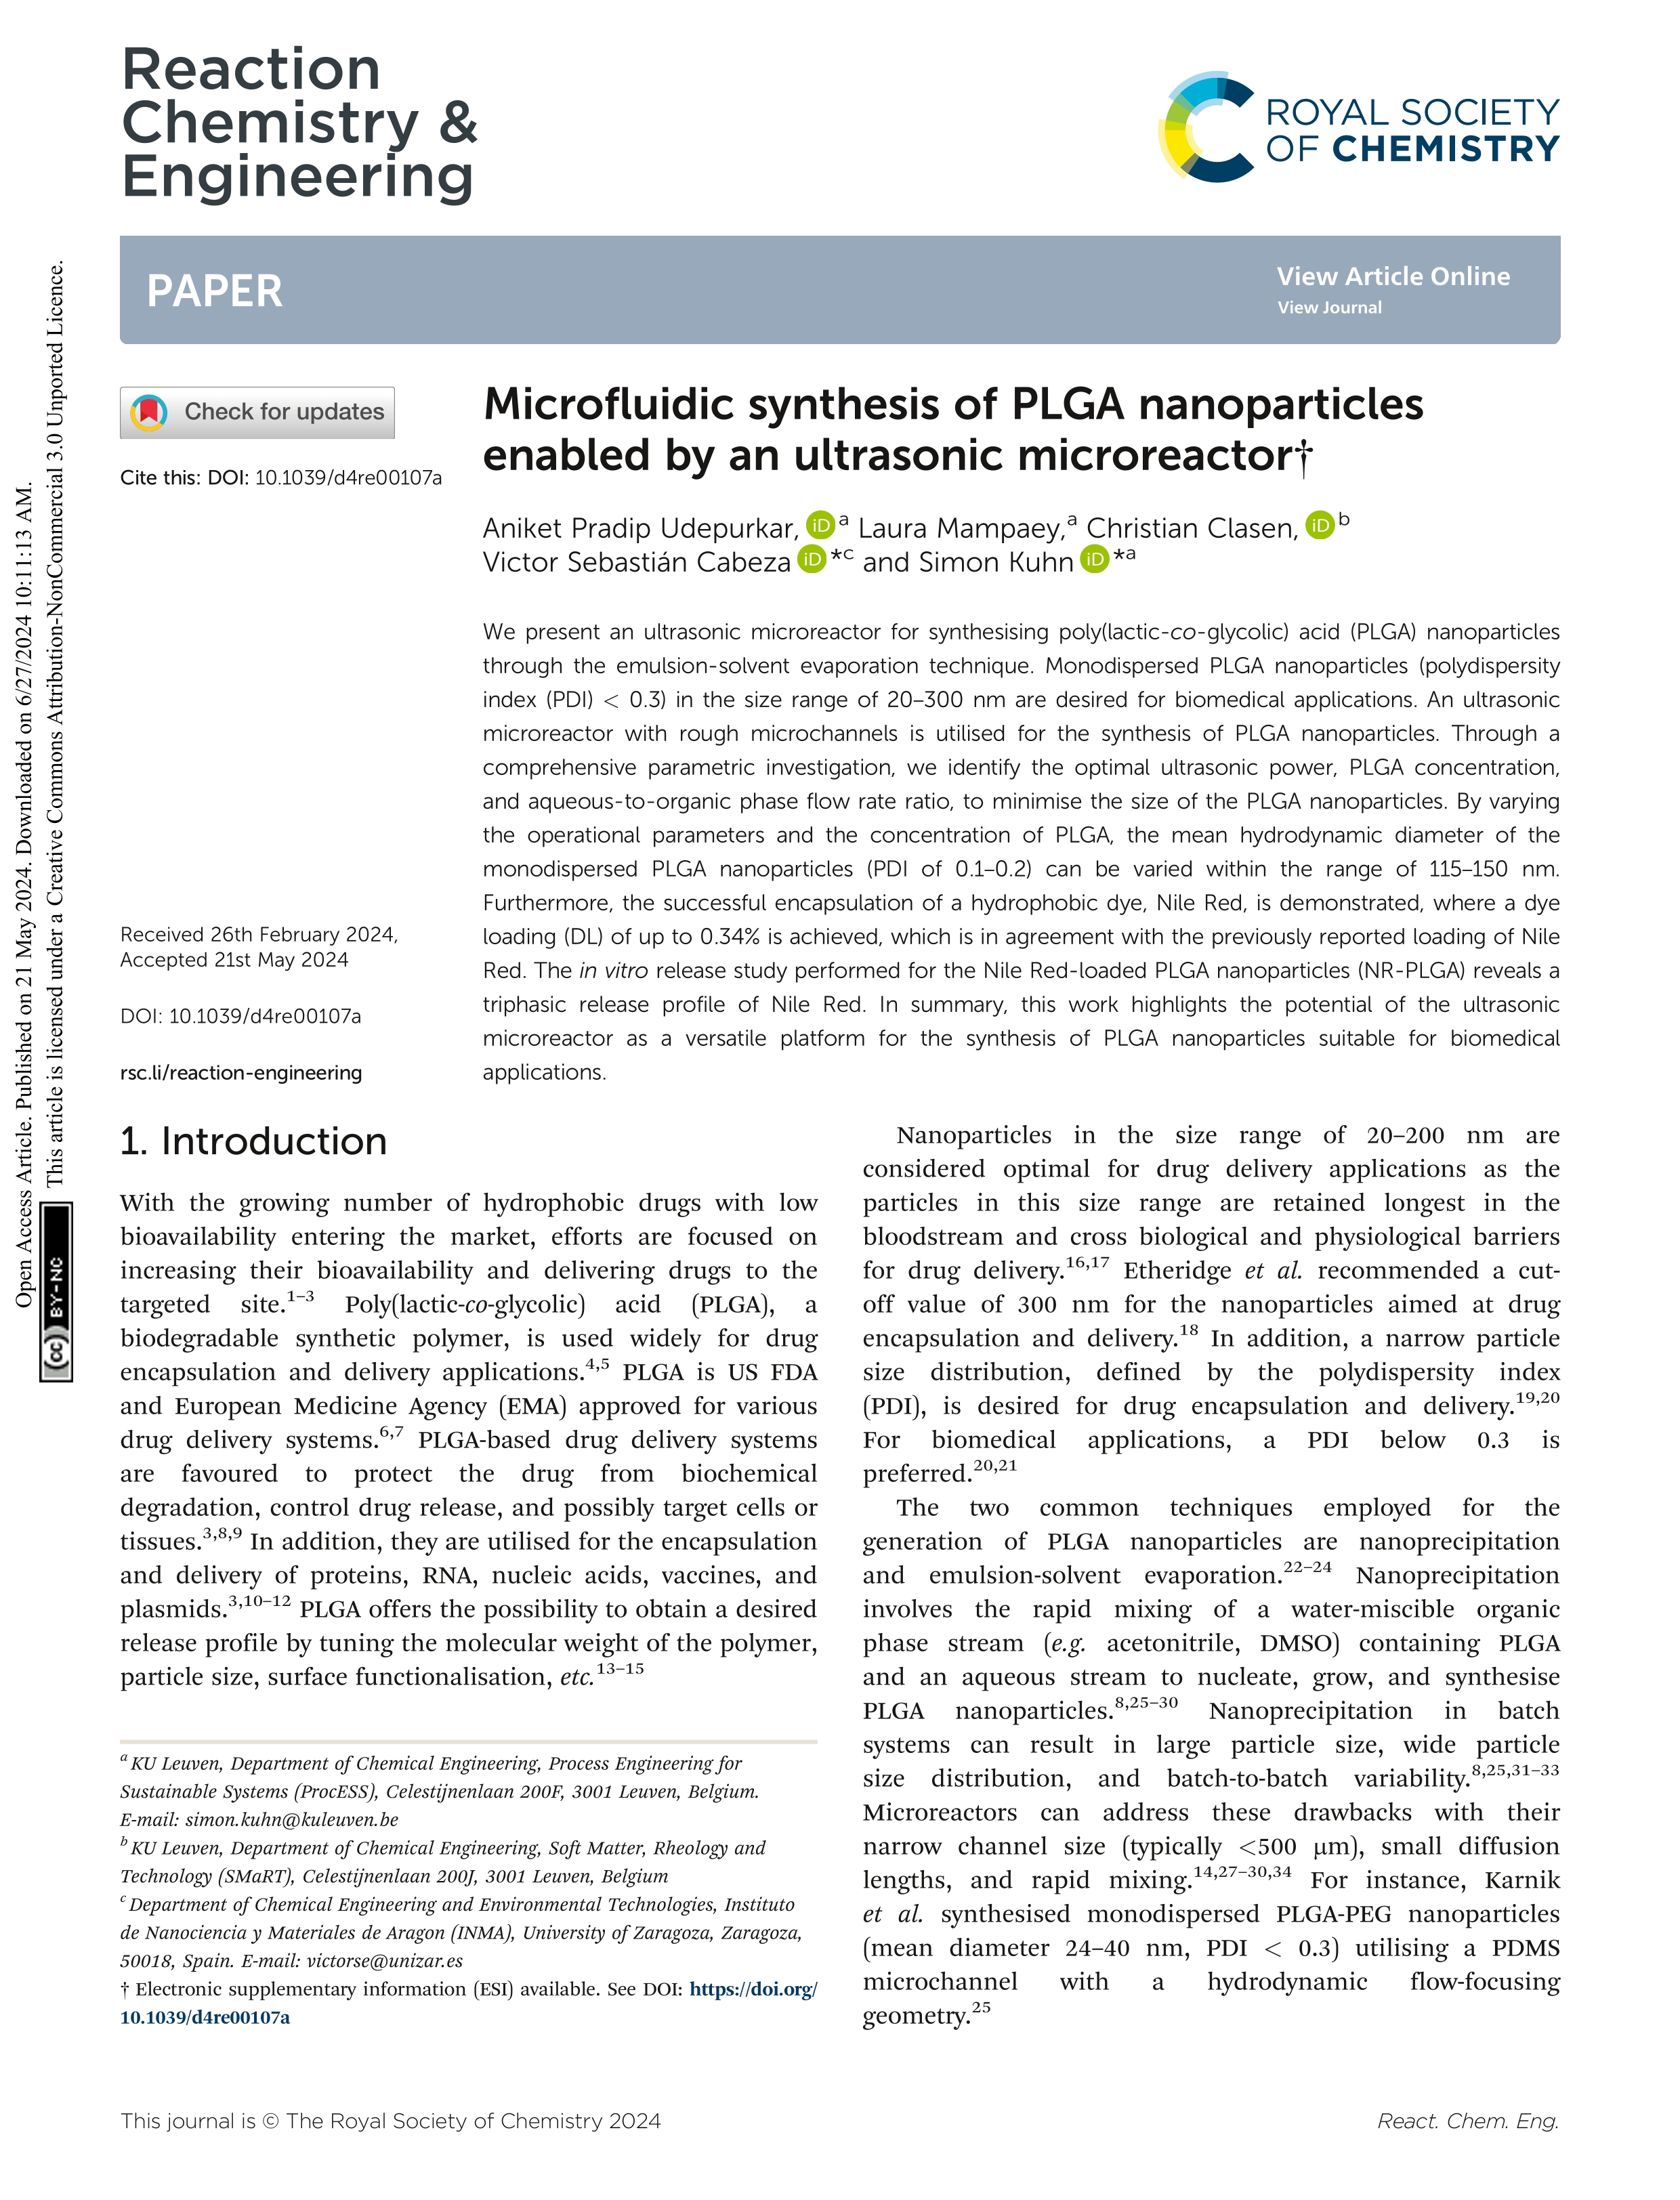 Microfluidic synthesis of PLGA nanoparticles enabled by an ultrasonic microreactor